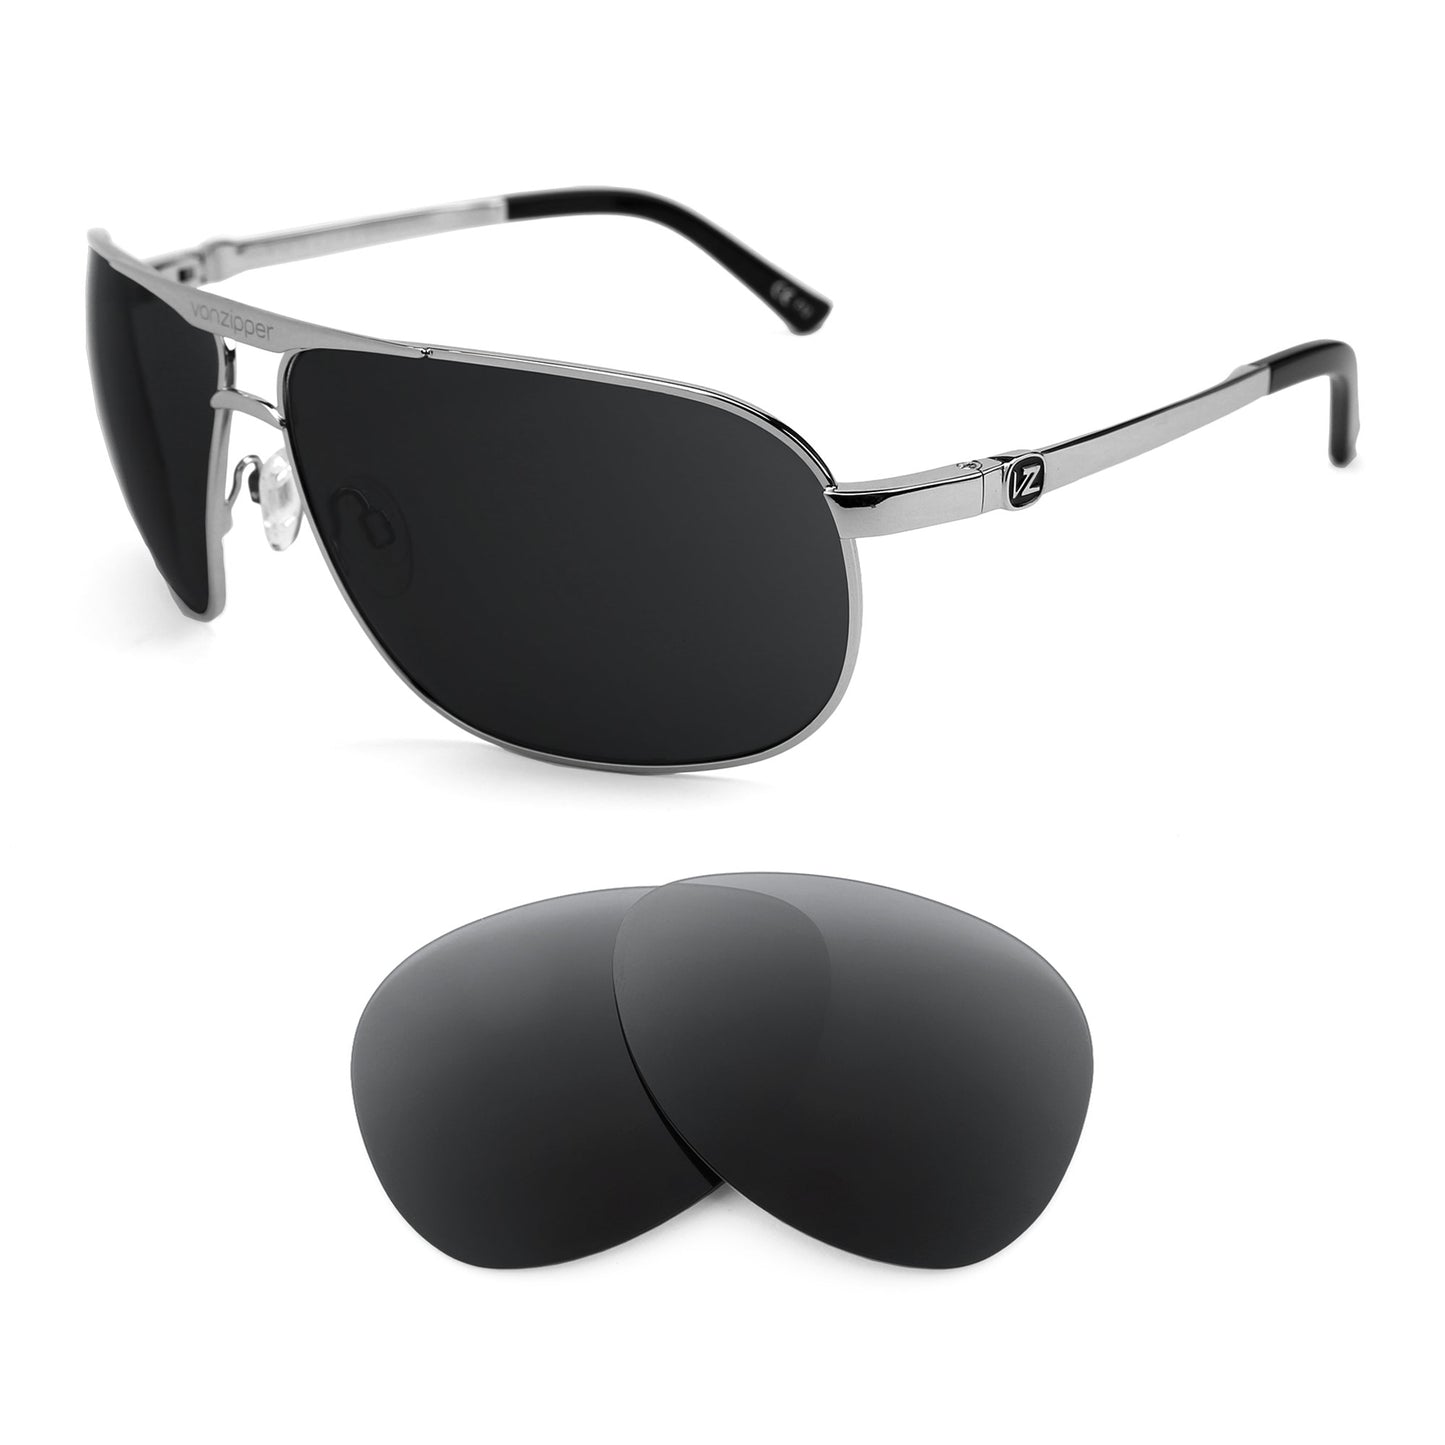 VonZipper Skitch sunglasses with replacement lenses